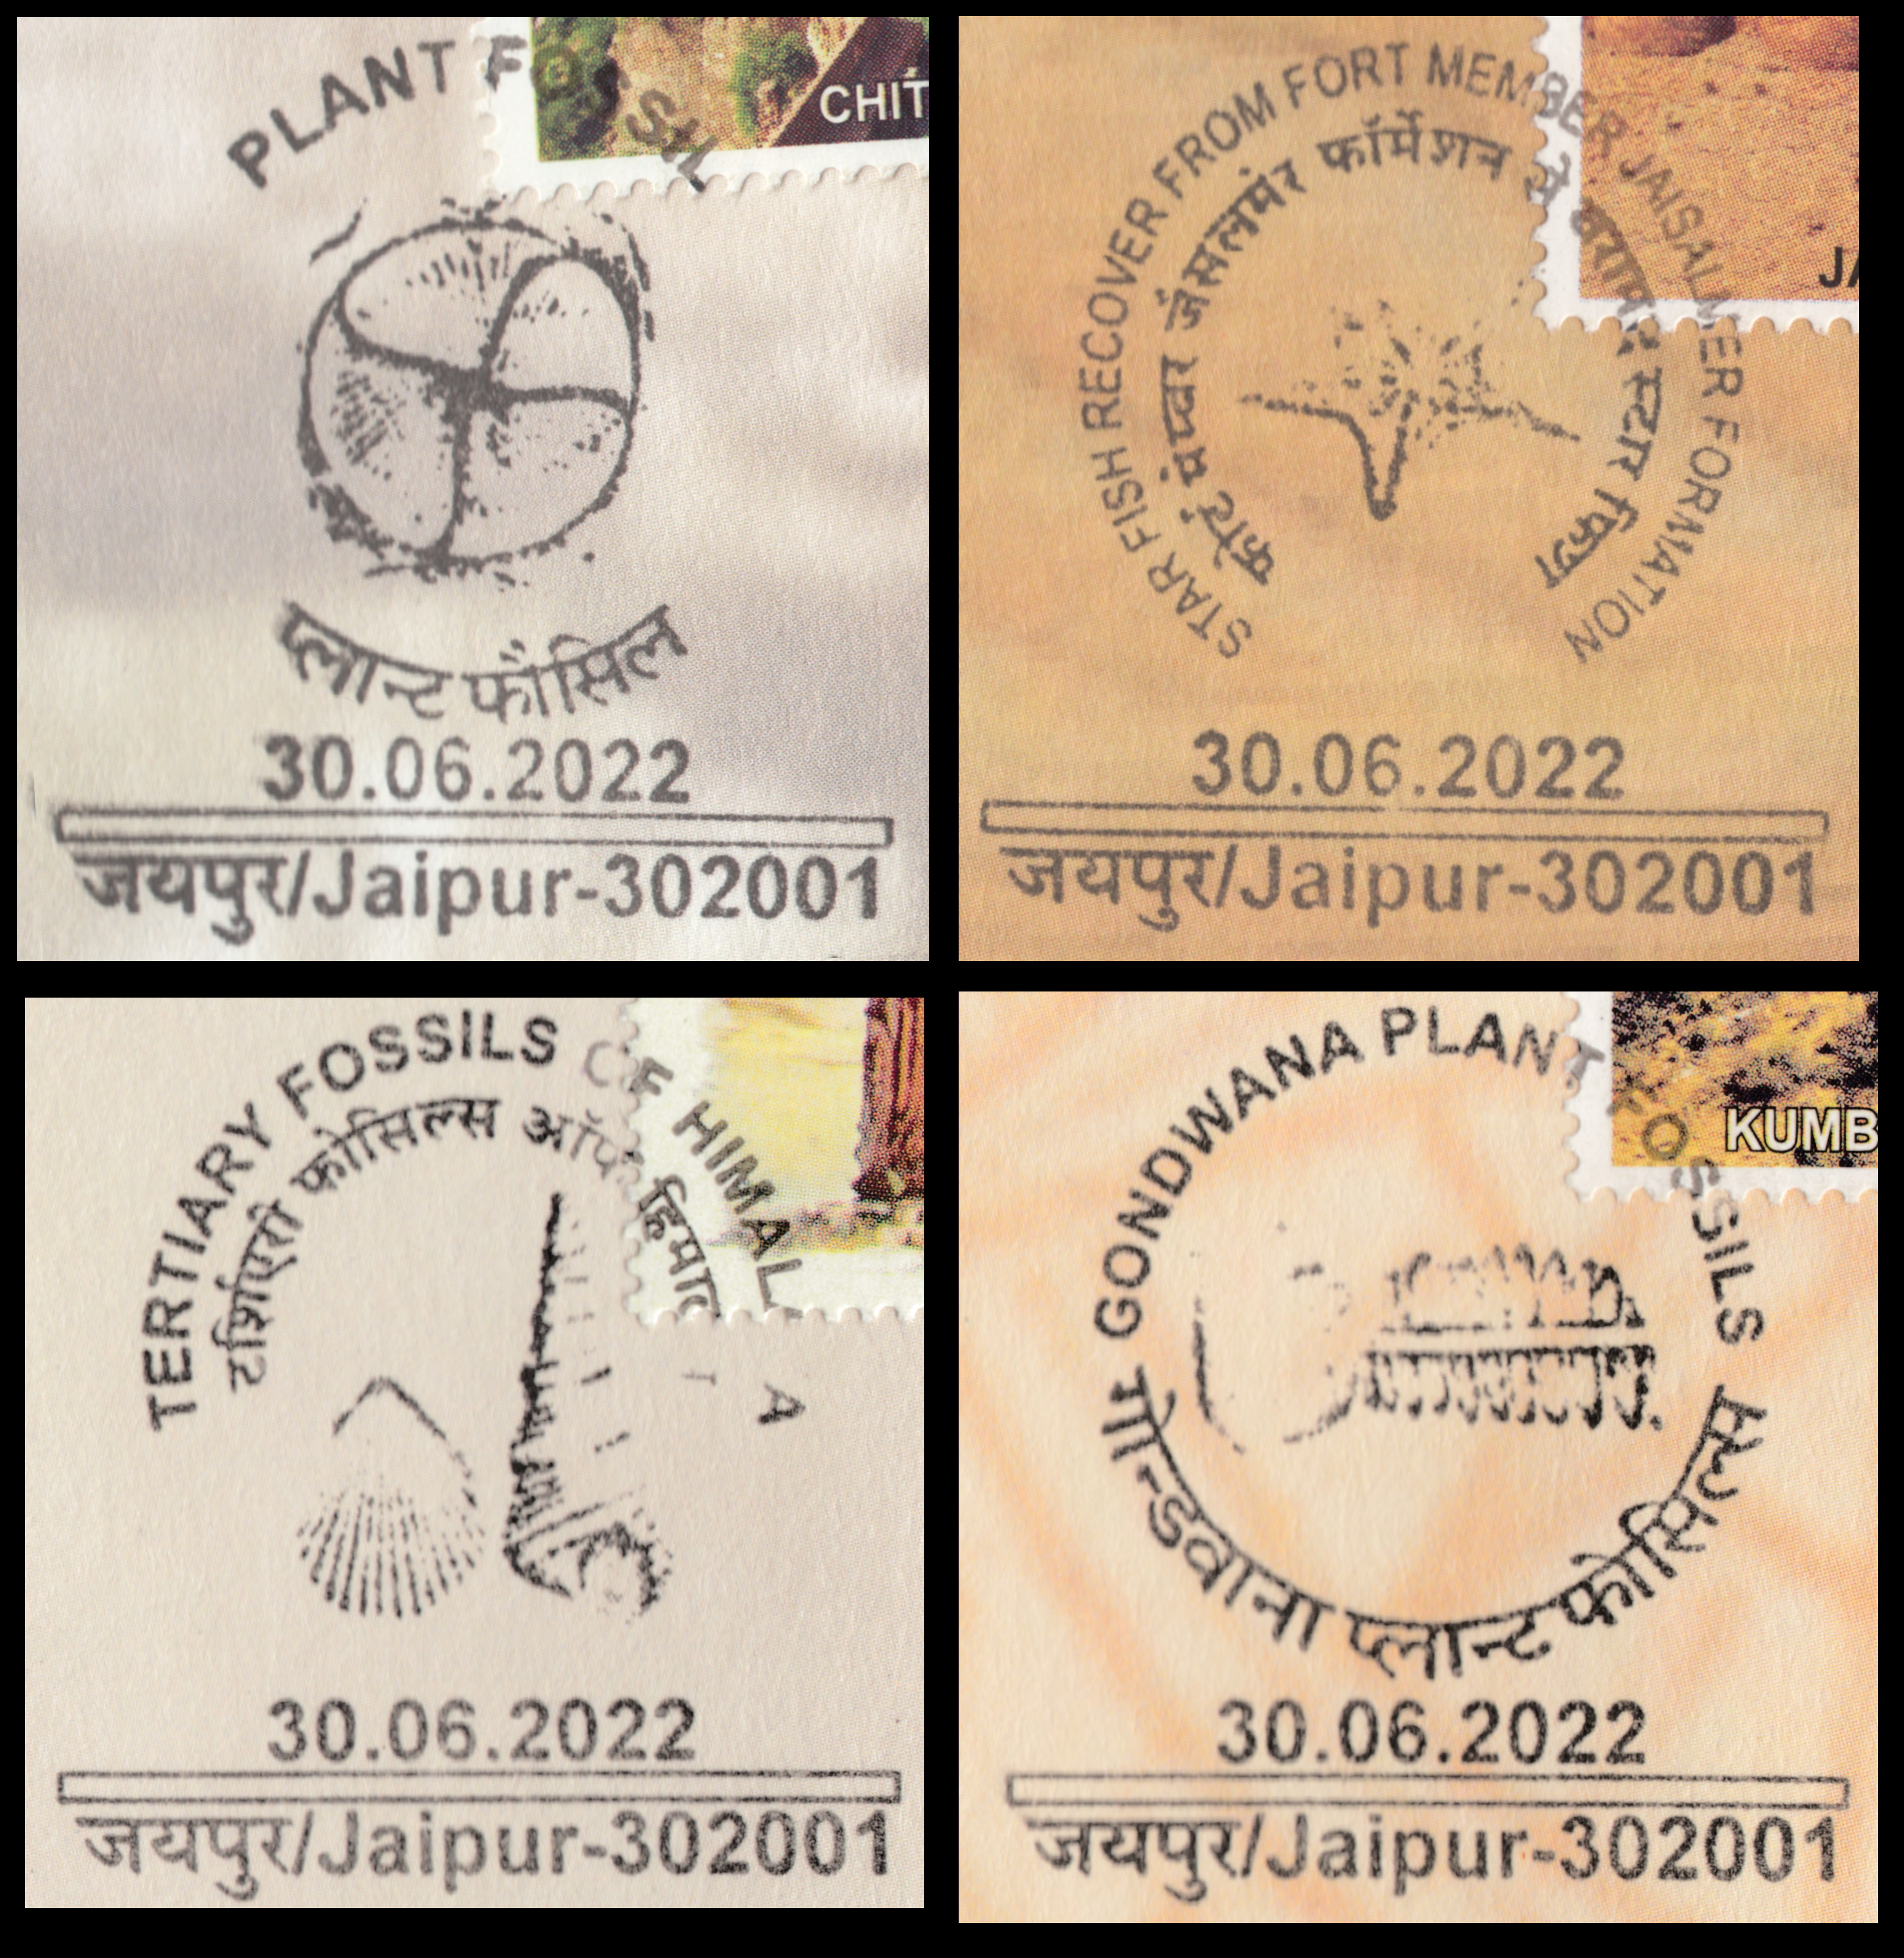 Fossils on commemorative postmarks of India 2022